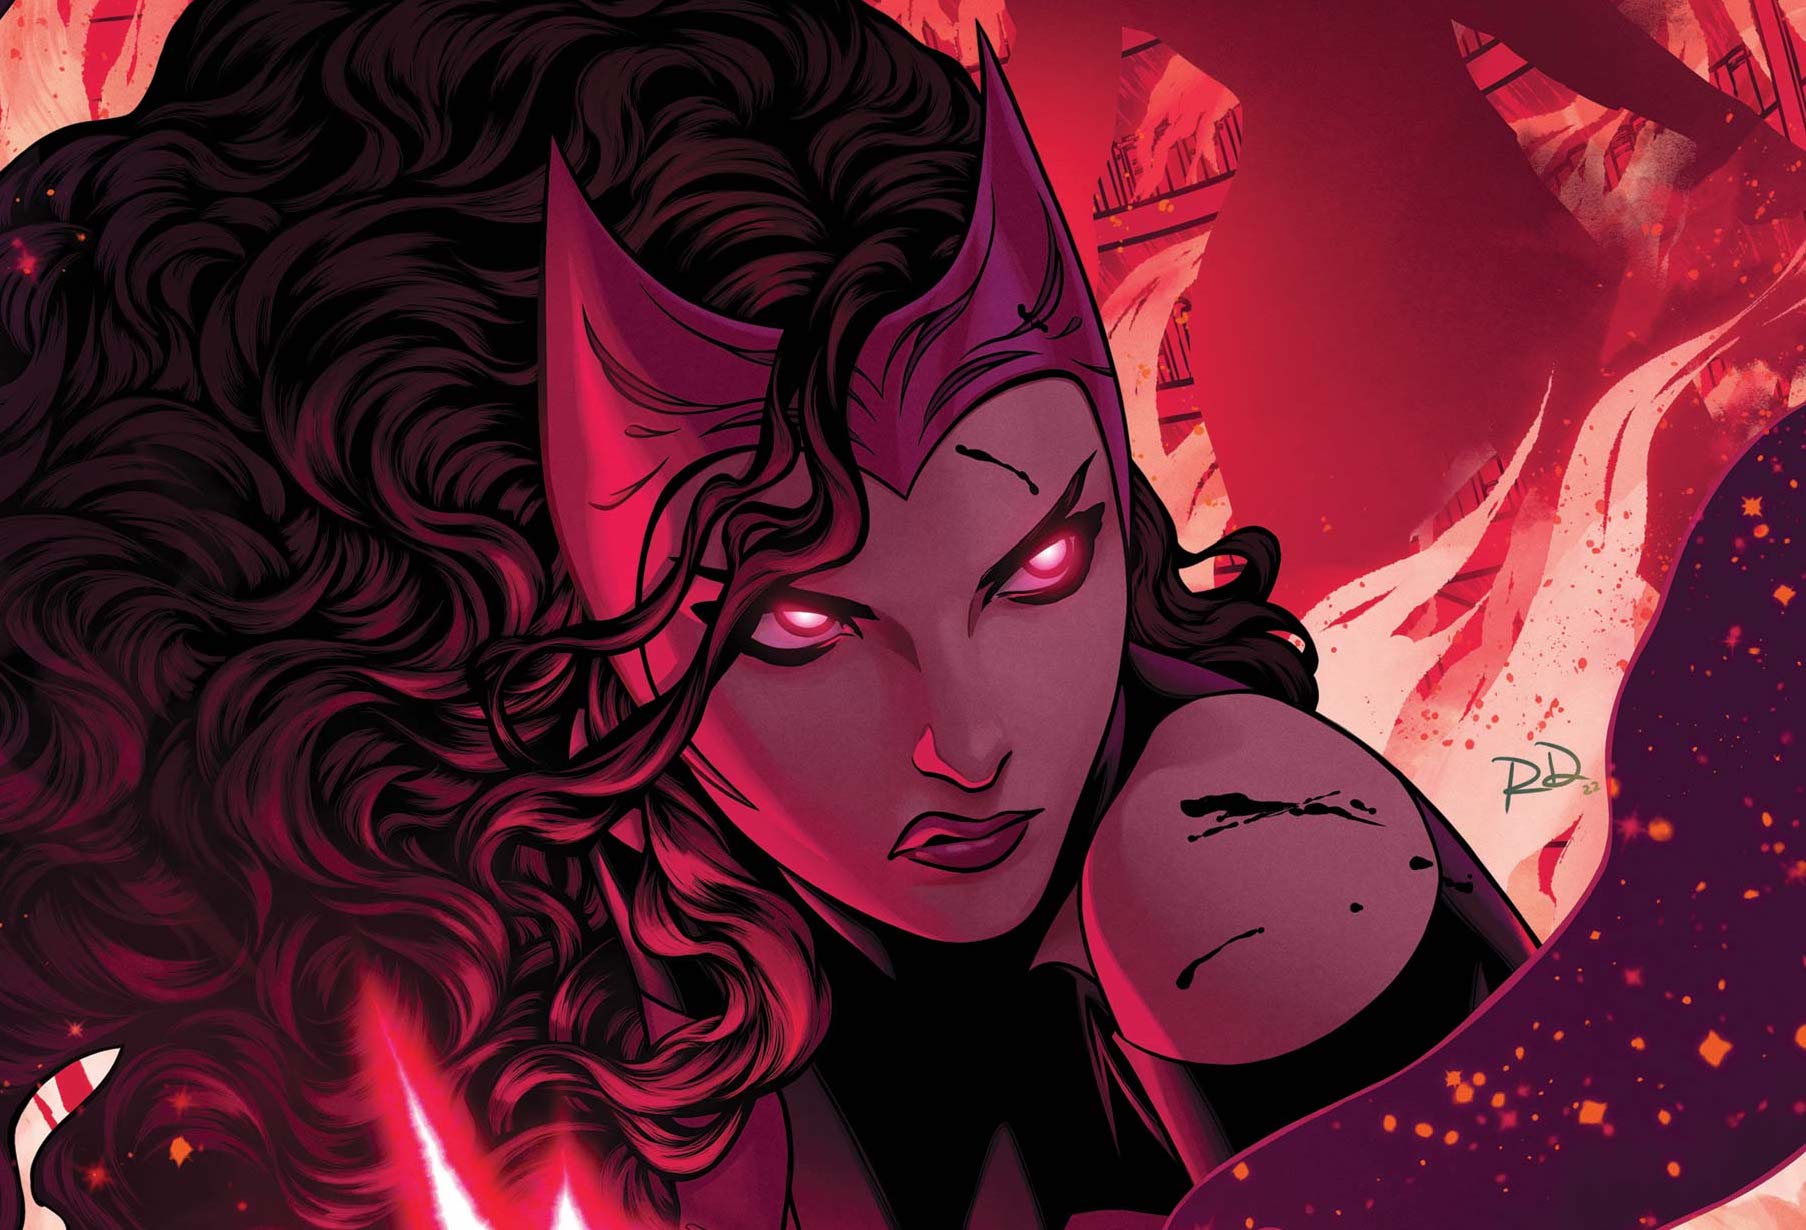 Scarlet Witch (2023) #2, Comic Issues